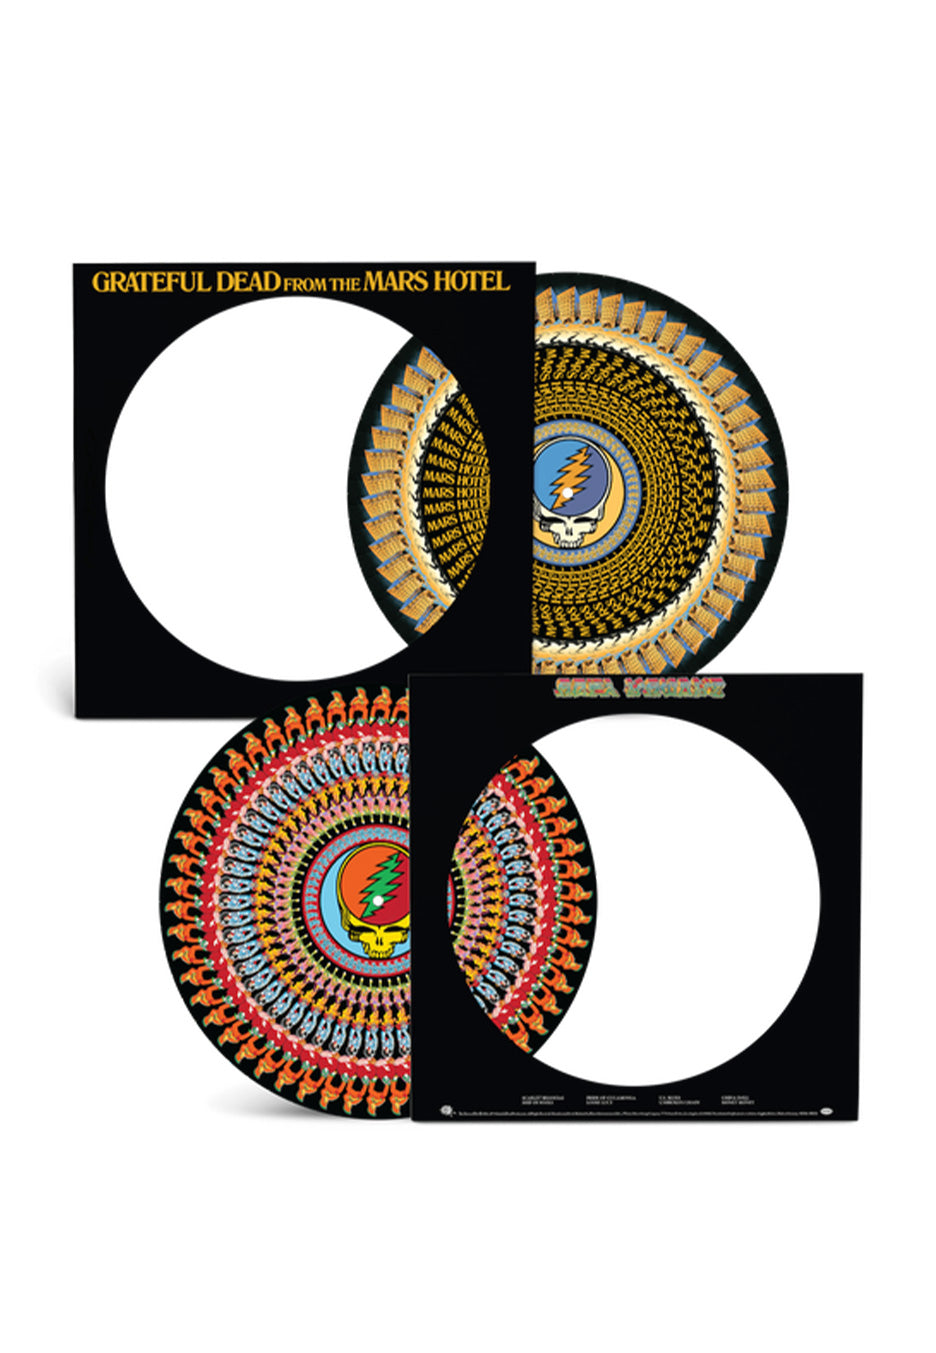 Grateful Dead - From The Mars Hotel (50th Anniversary Edition)  Ltd. Zoetrope - Picture Vinyl